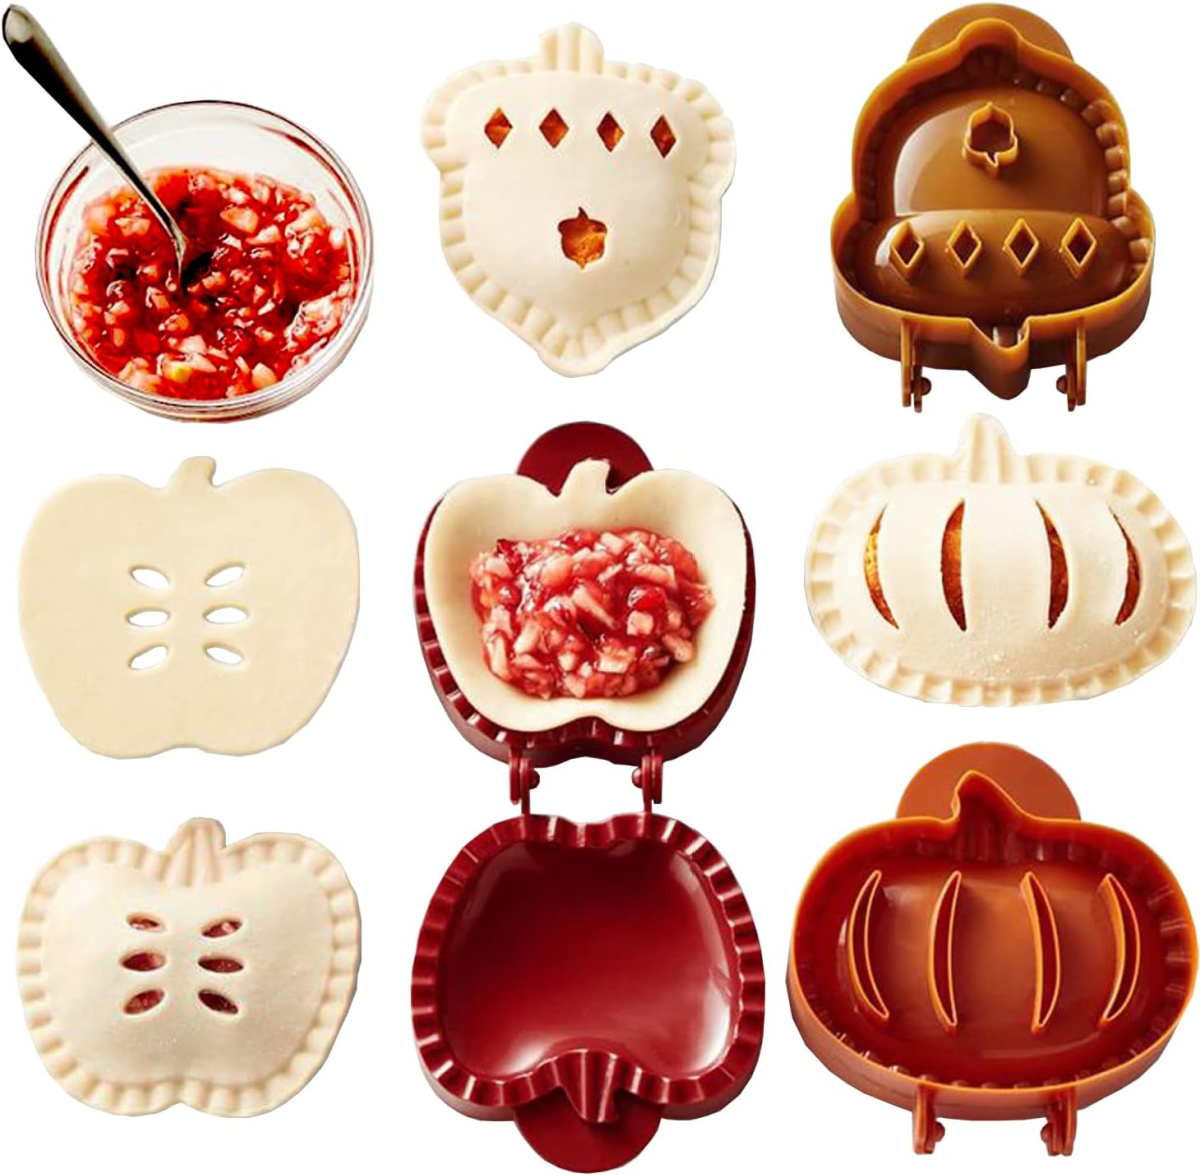 Must Have Fall and Halloween Baking Items from Amazon